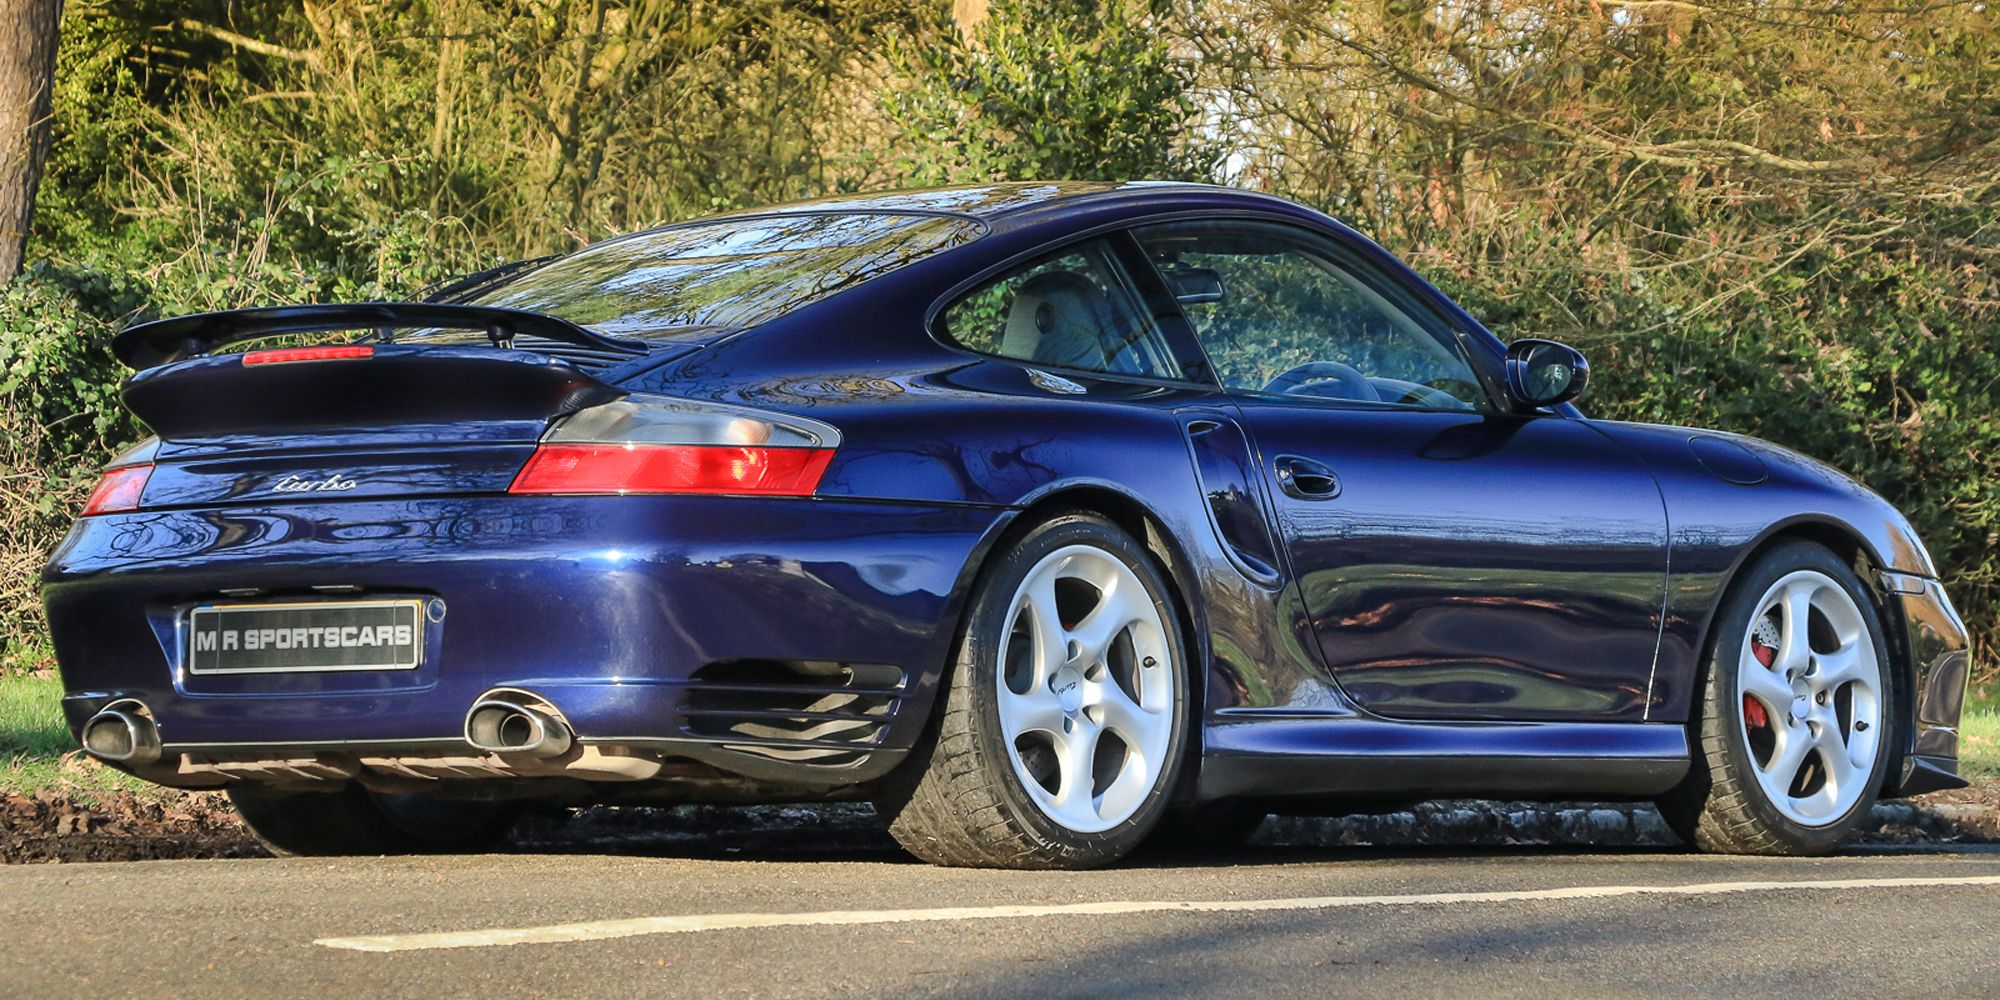 Rear 3/4 view of the 996 911 Turbo